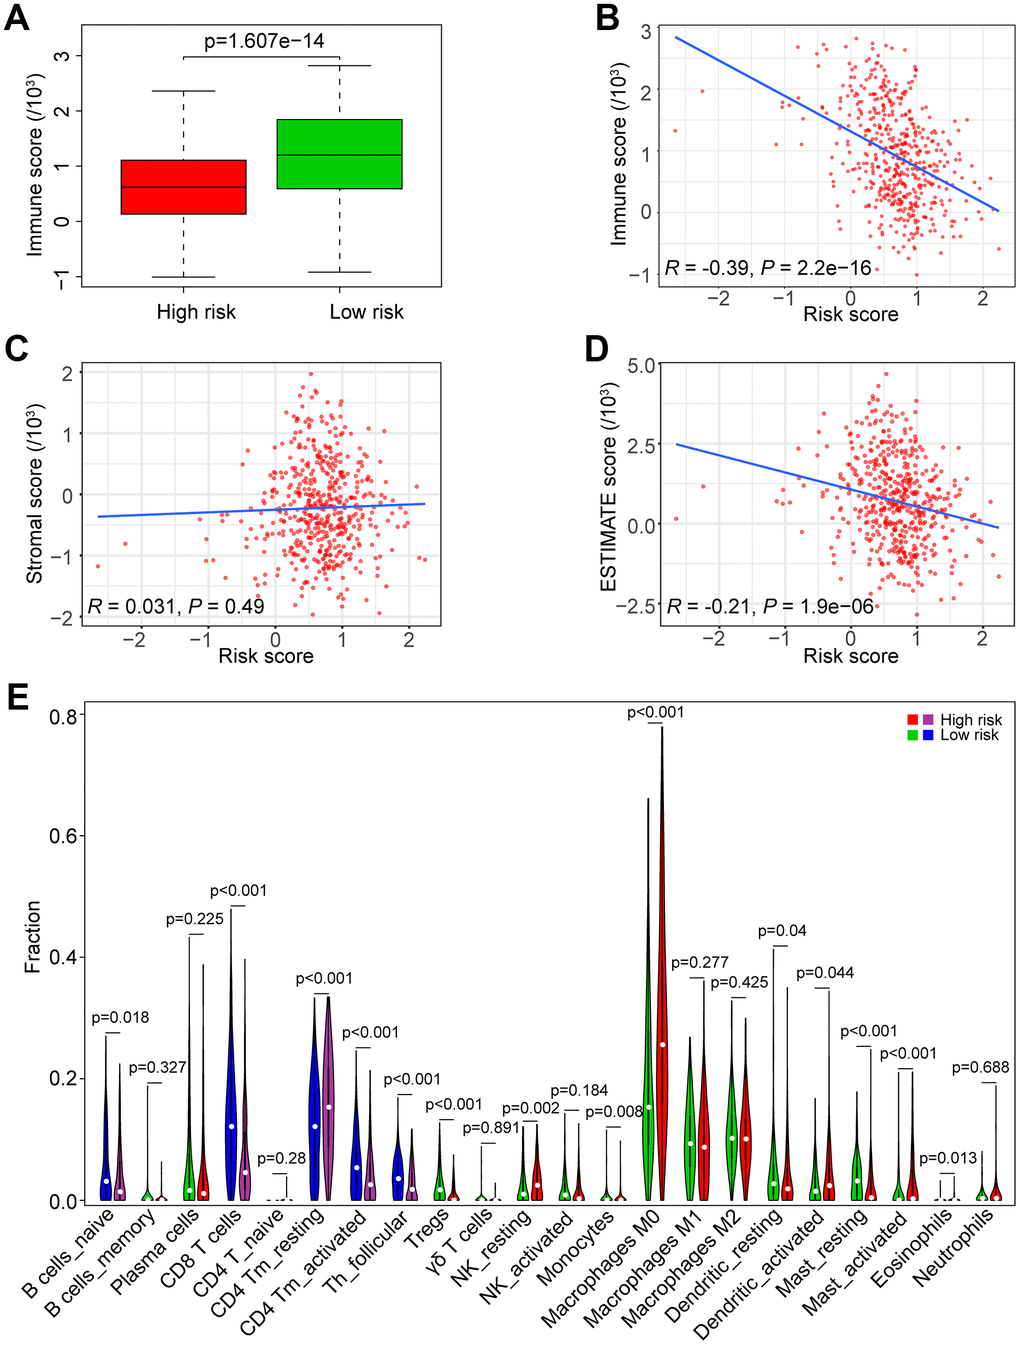 Association of the risk score with tumor immunity in the TCGA data set. (A) Distribution of immune scores according to the risk score of HNSCC patients. (B) Correlation of the risk score with the immune score in HNSCC samples. (C) Correlation of the risk score with the stromal score in HNSCC samples. (D) Correlation of the risk score with the ESTIMATE score in HNSCC samples. (E) Comparisons of immune cells between the high-risk and low-risk groups.